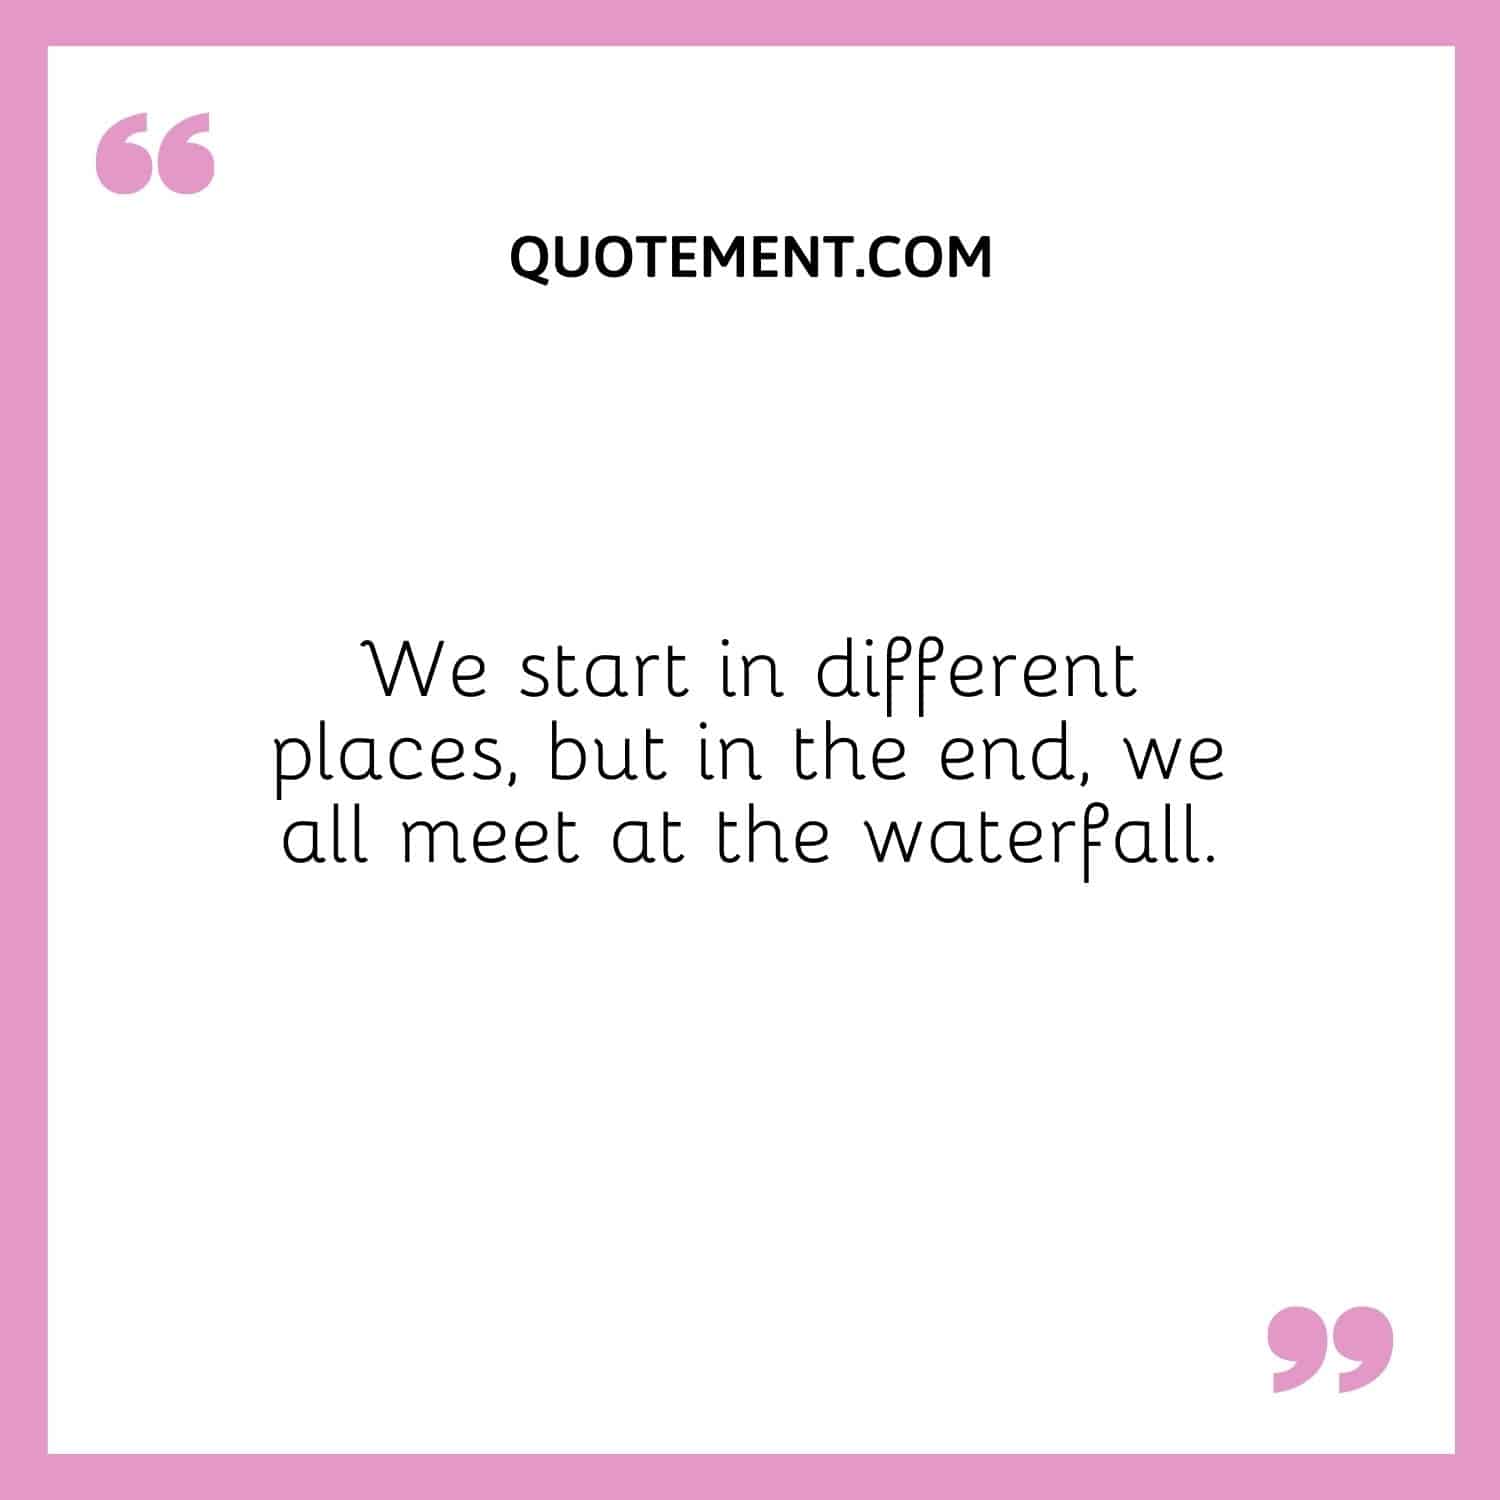 We start in different places, but in the end, we all meet at the waterfall.